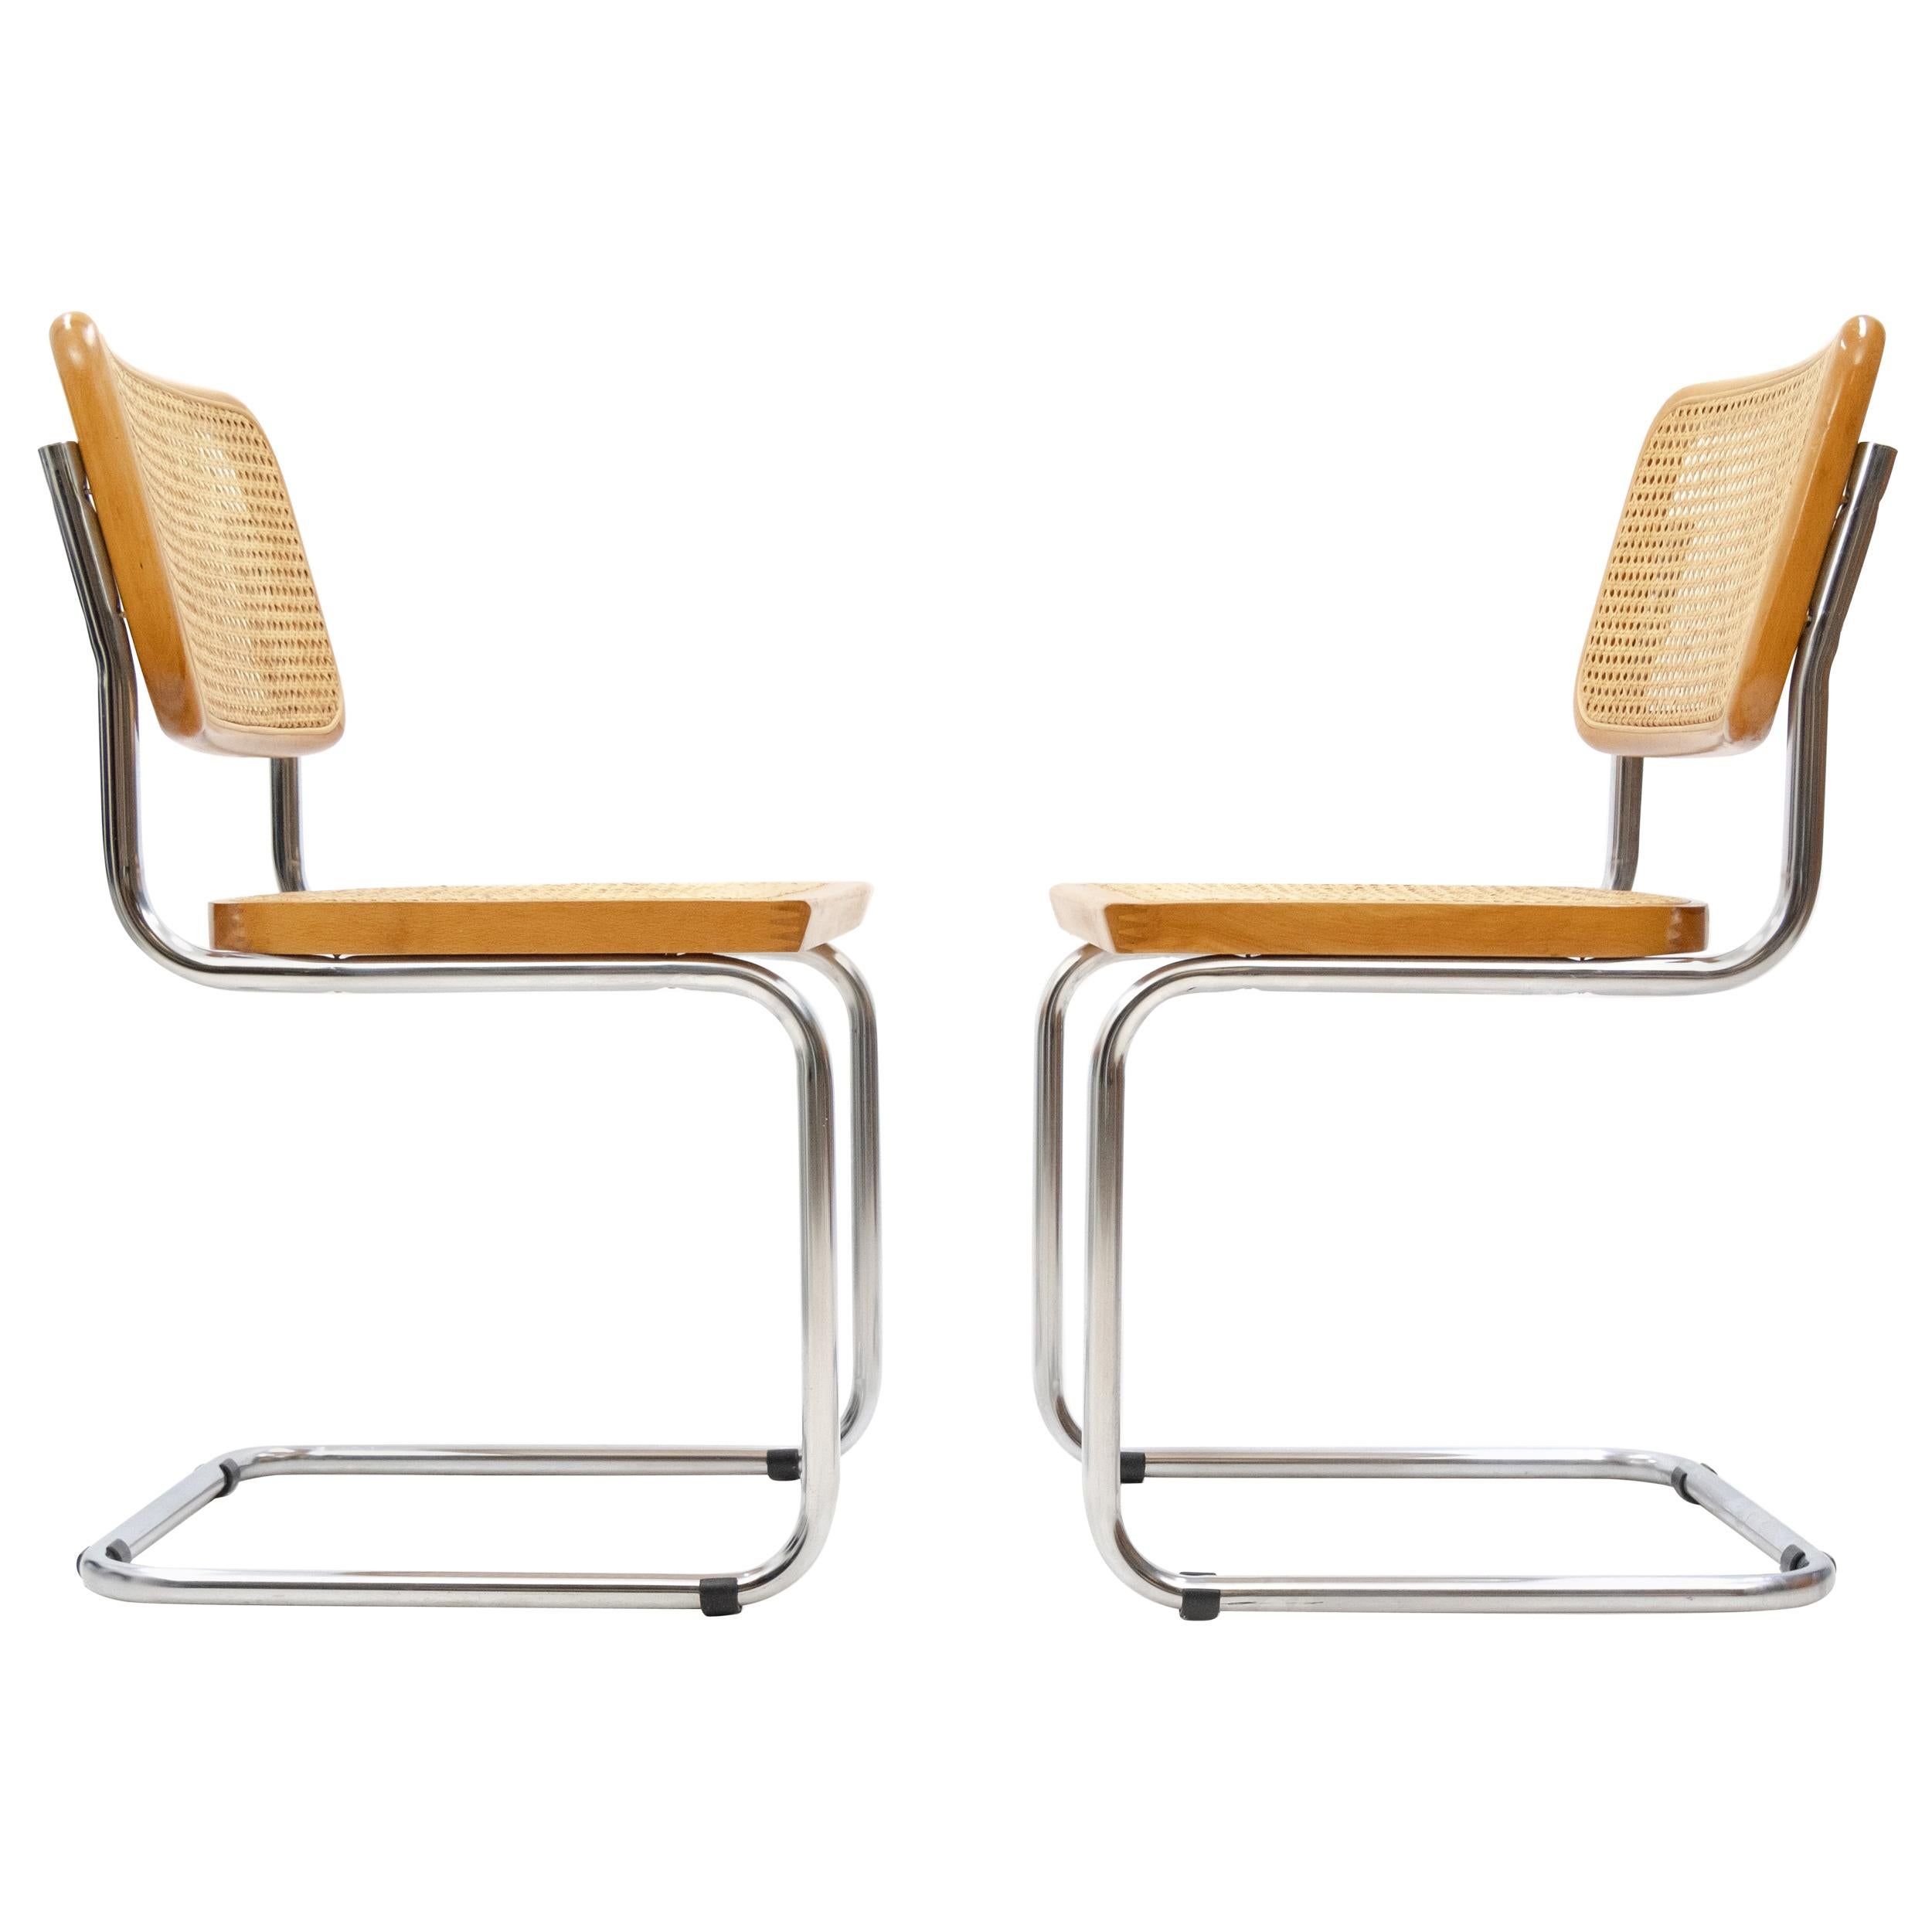 Marcel Breuer Cesca S32 Chairs, 1980s at 1stDibs